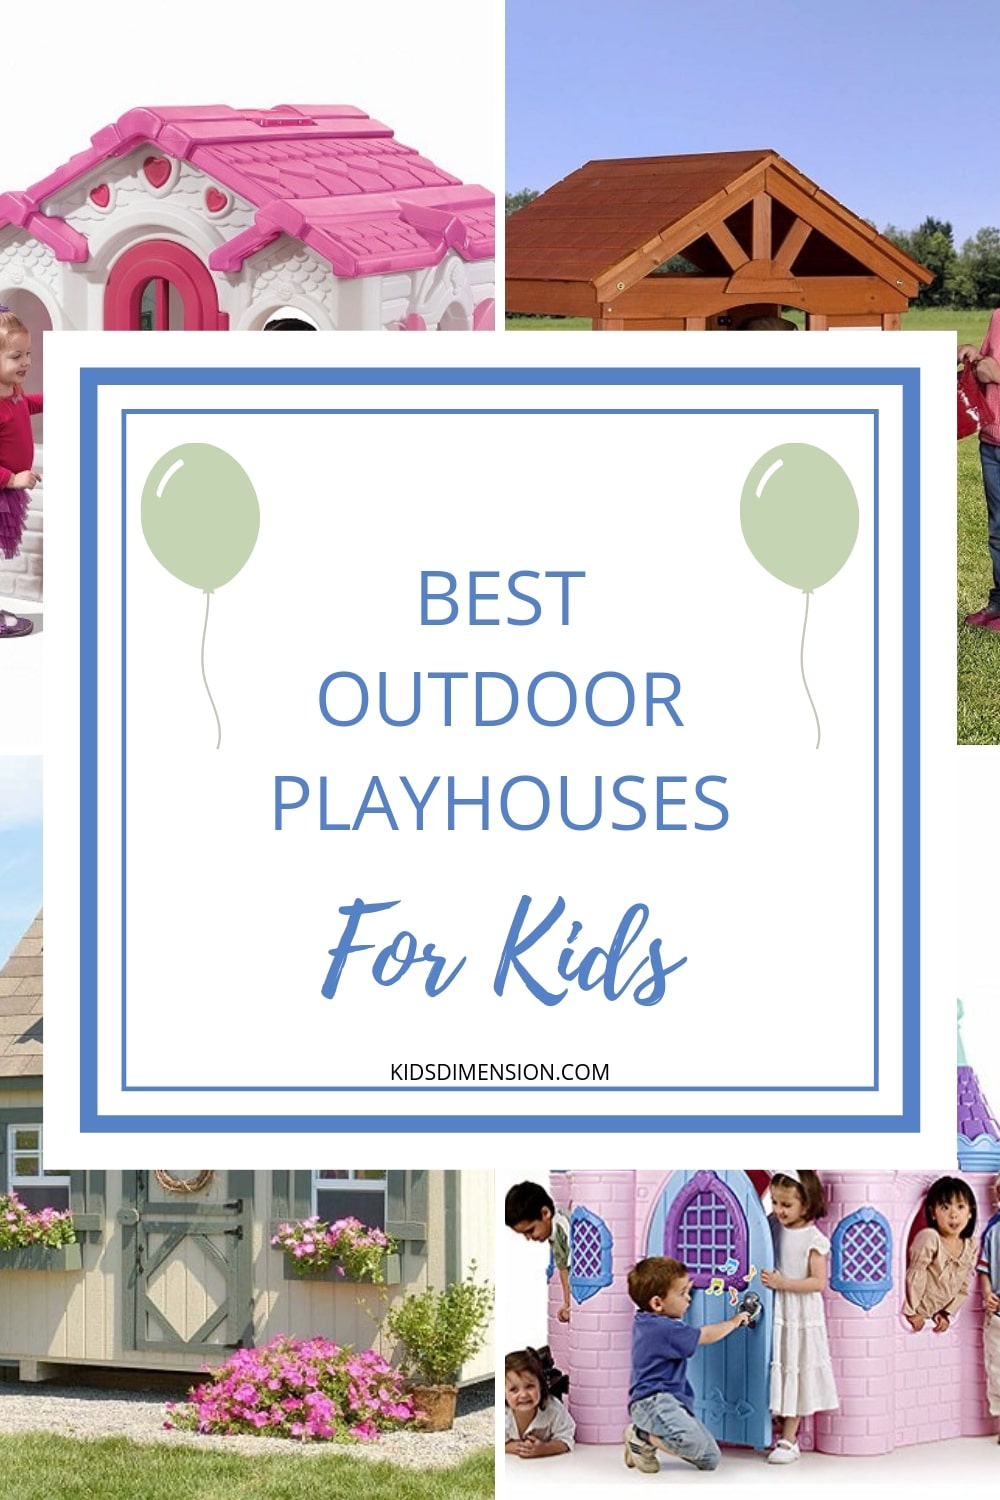 Best Outdoor Playhouses for Kids